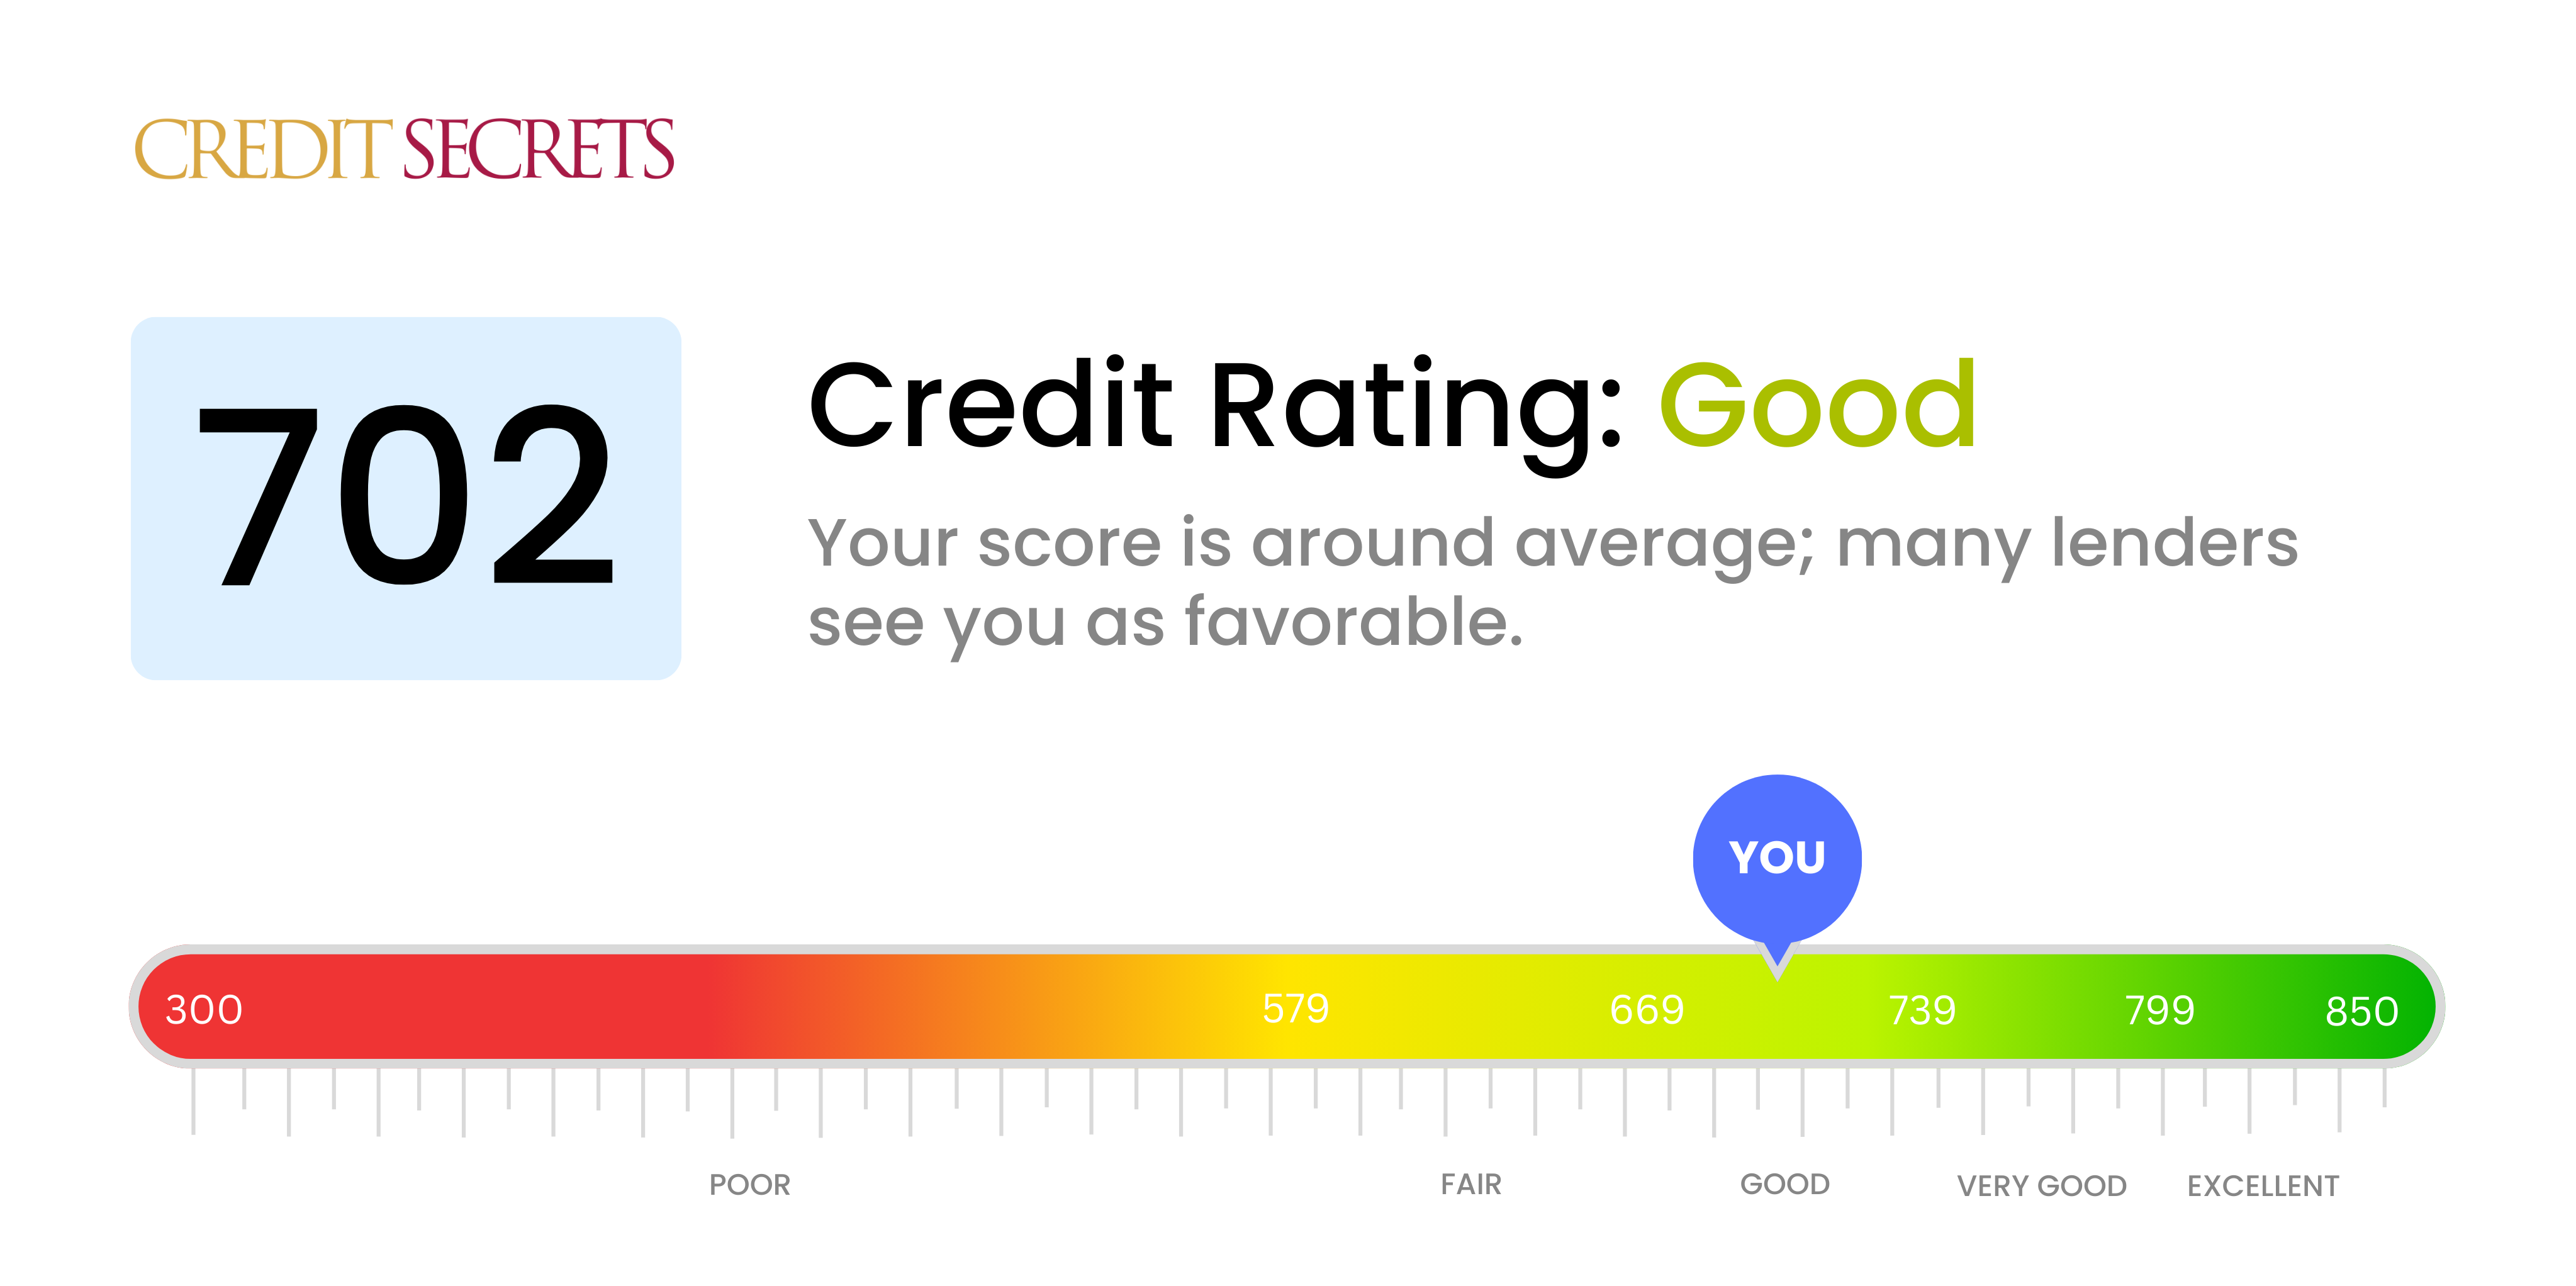 Is 702 a good credit score?